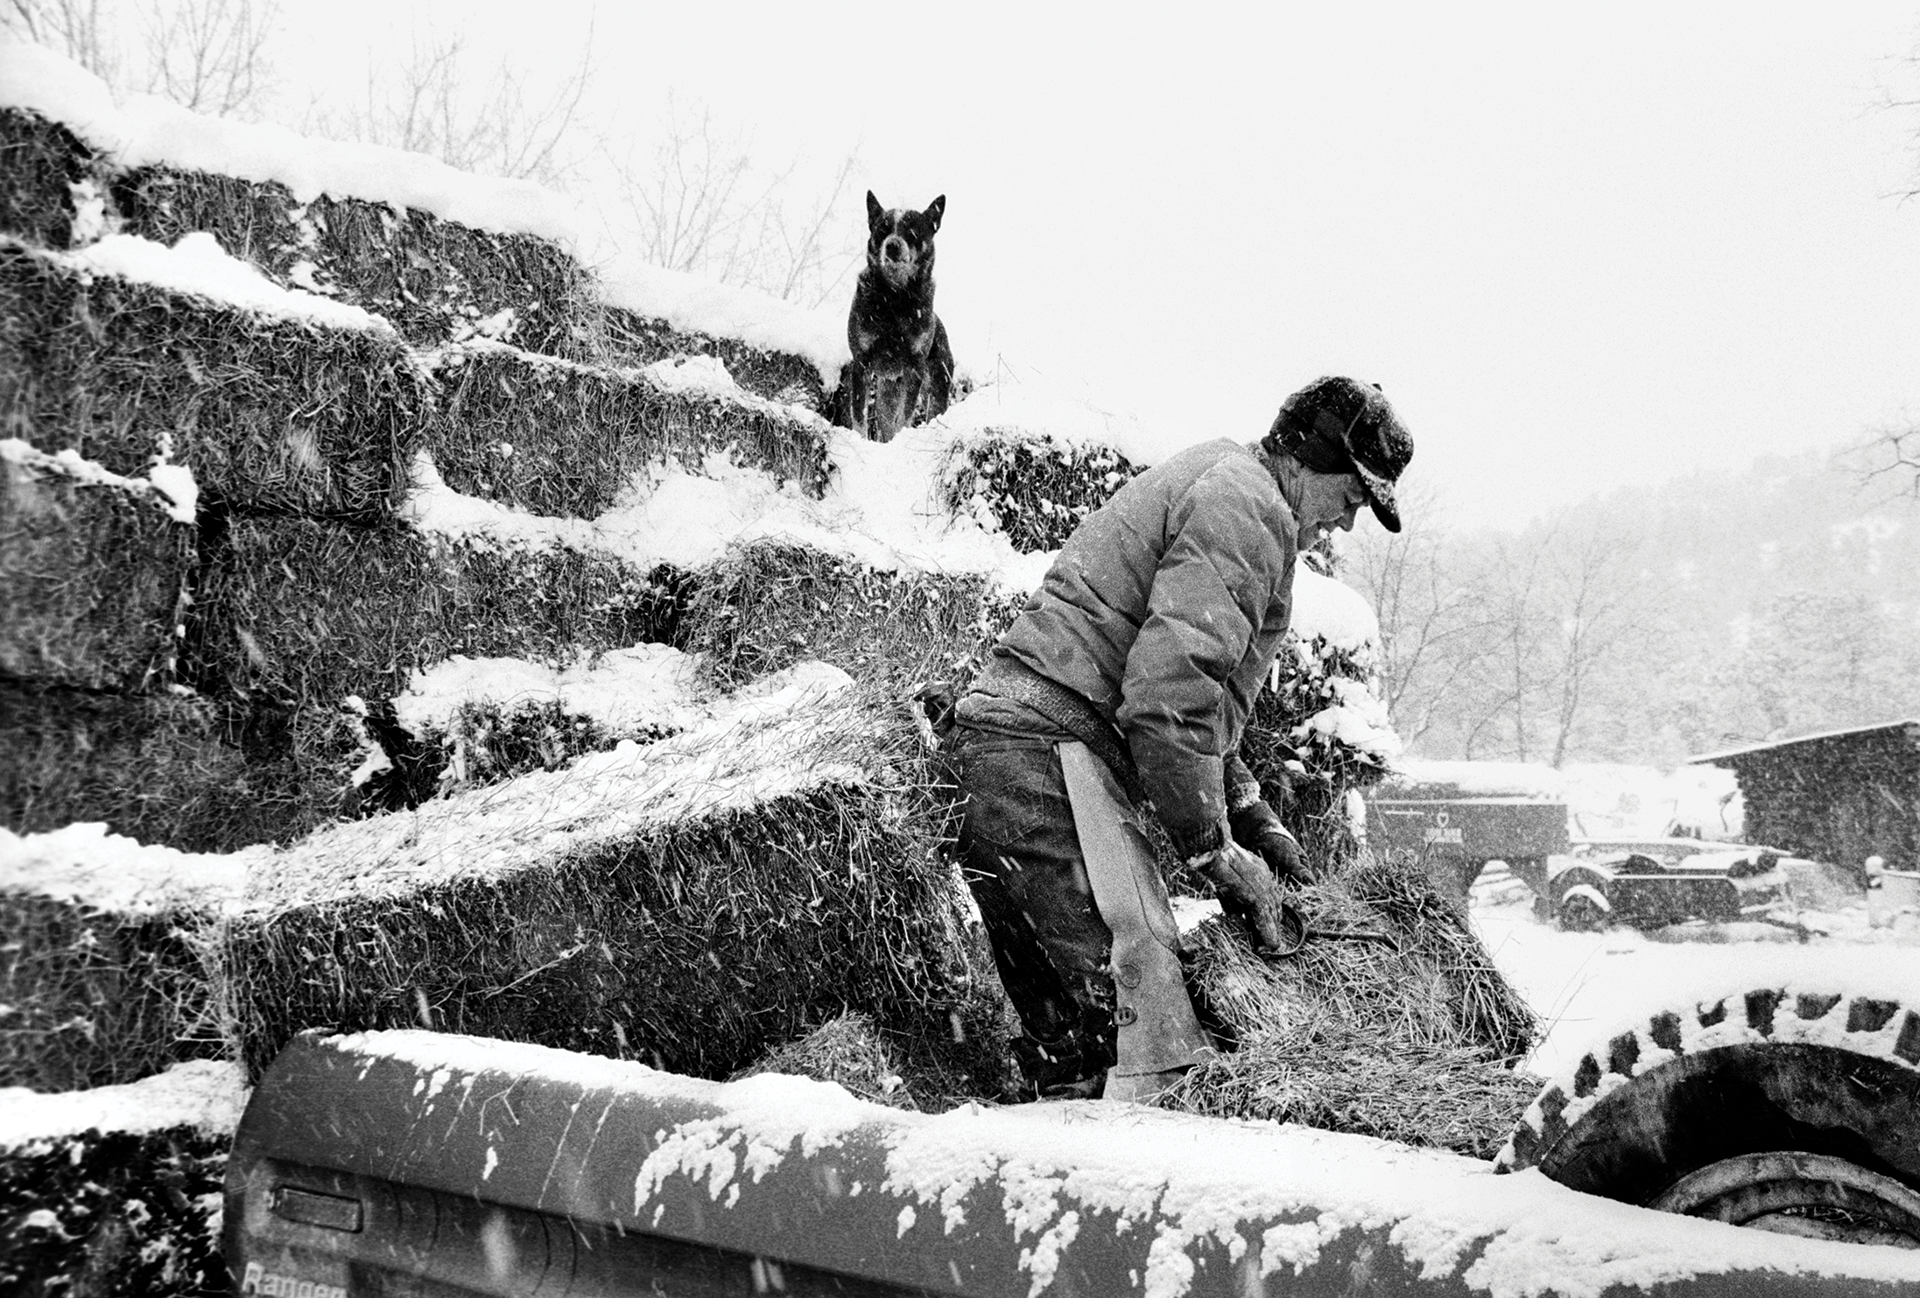 A woman wearing a winter hat with a brim lifts a snow-covered square bale of hay toward a pile of hay bales while a dog sits on the bales, watching.